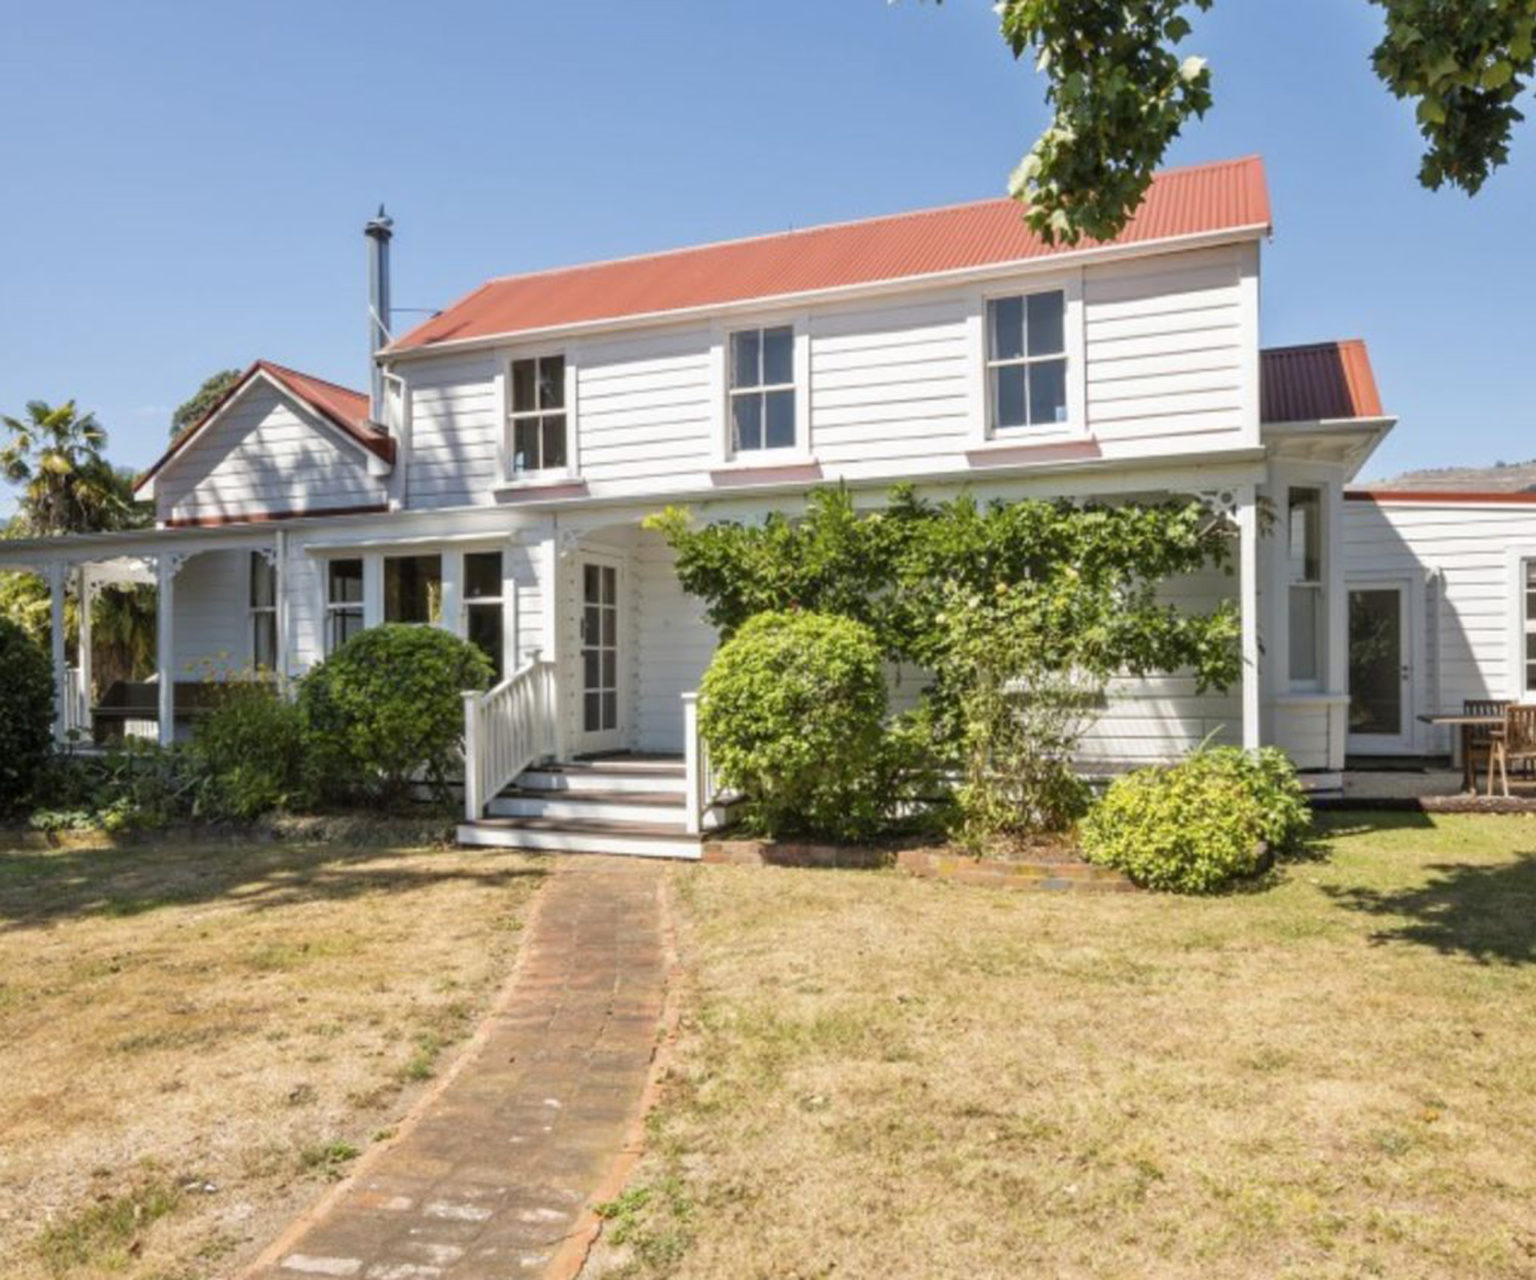 6 homes for sale across New Zealand that are full of character